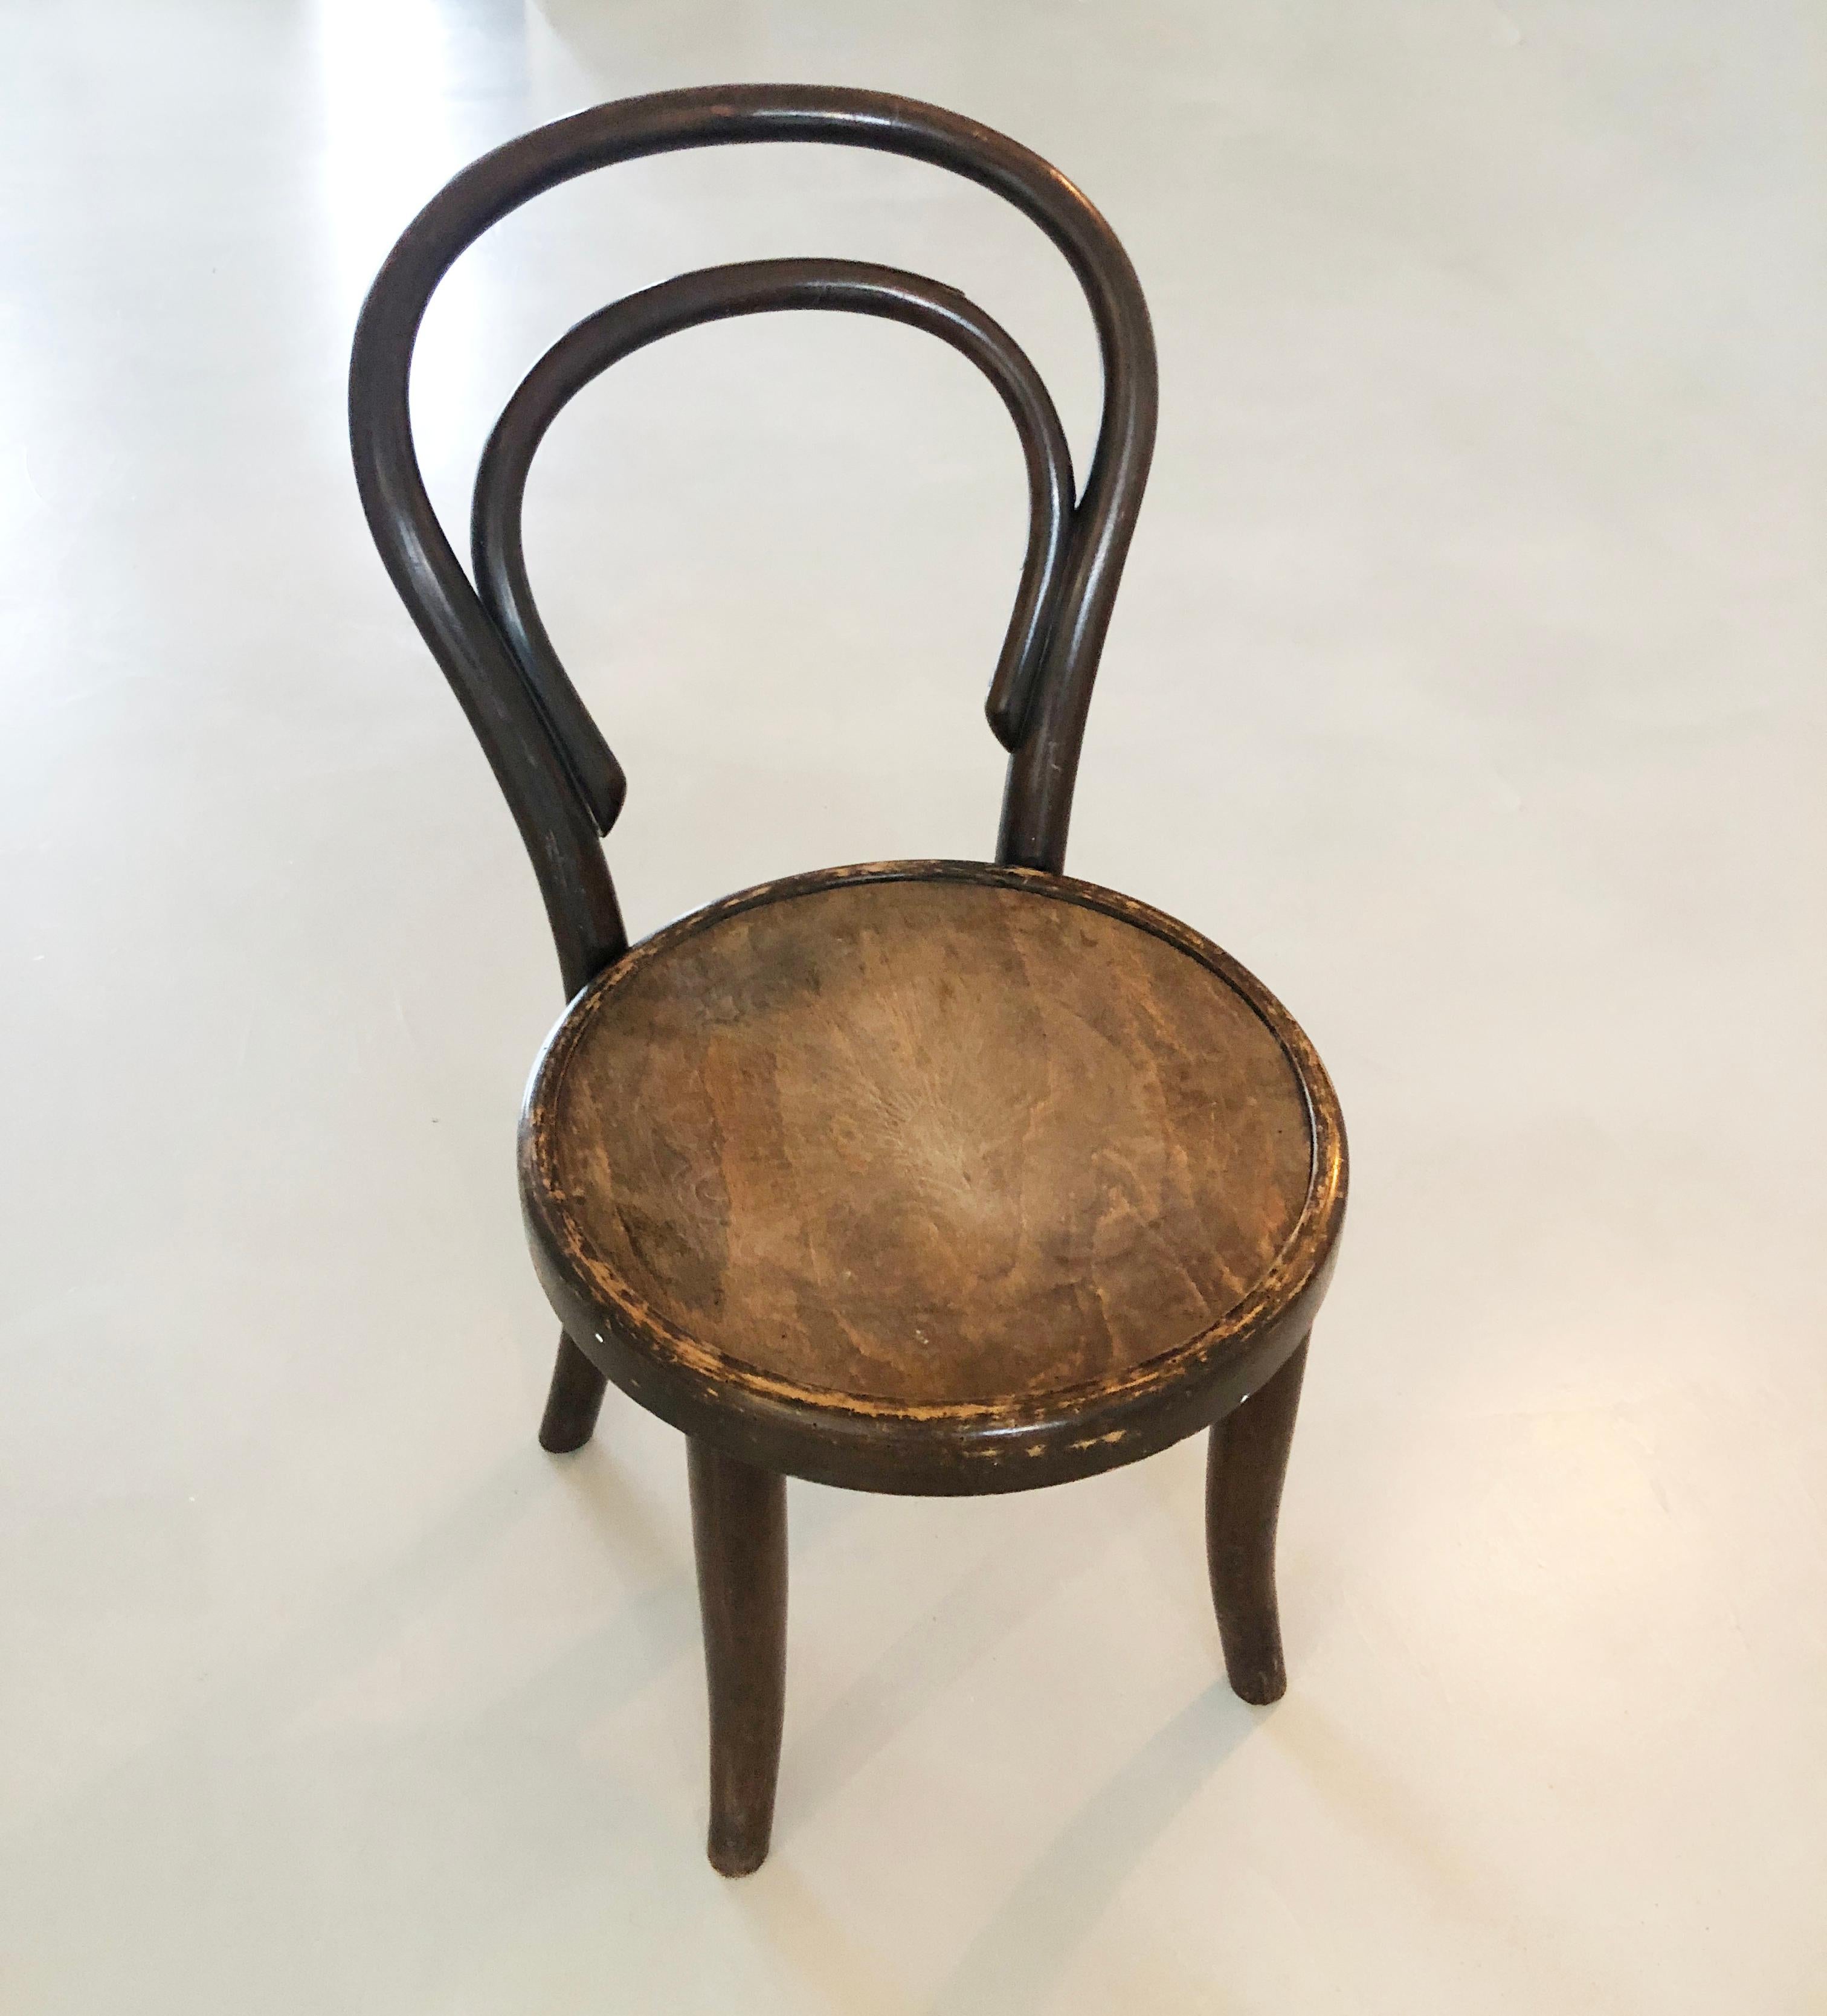 Thonet Child Chair No14 / designed 1859 Vienna / Stamped and labeled / Bentwood 10